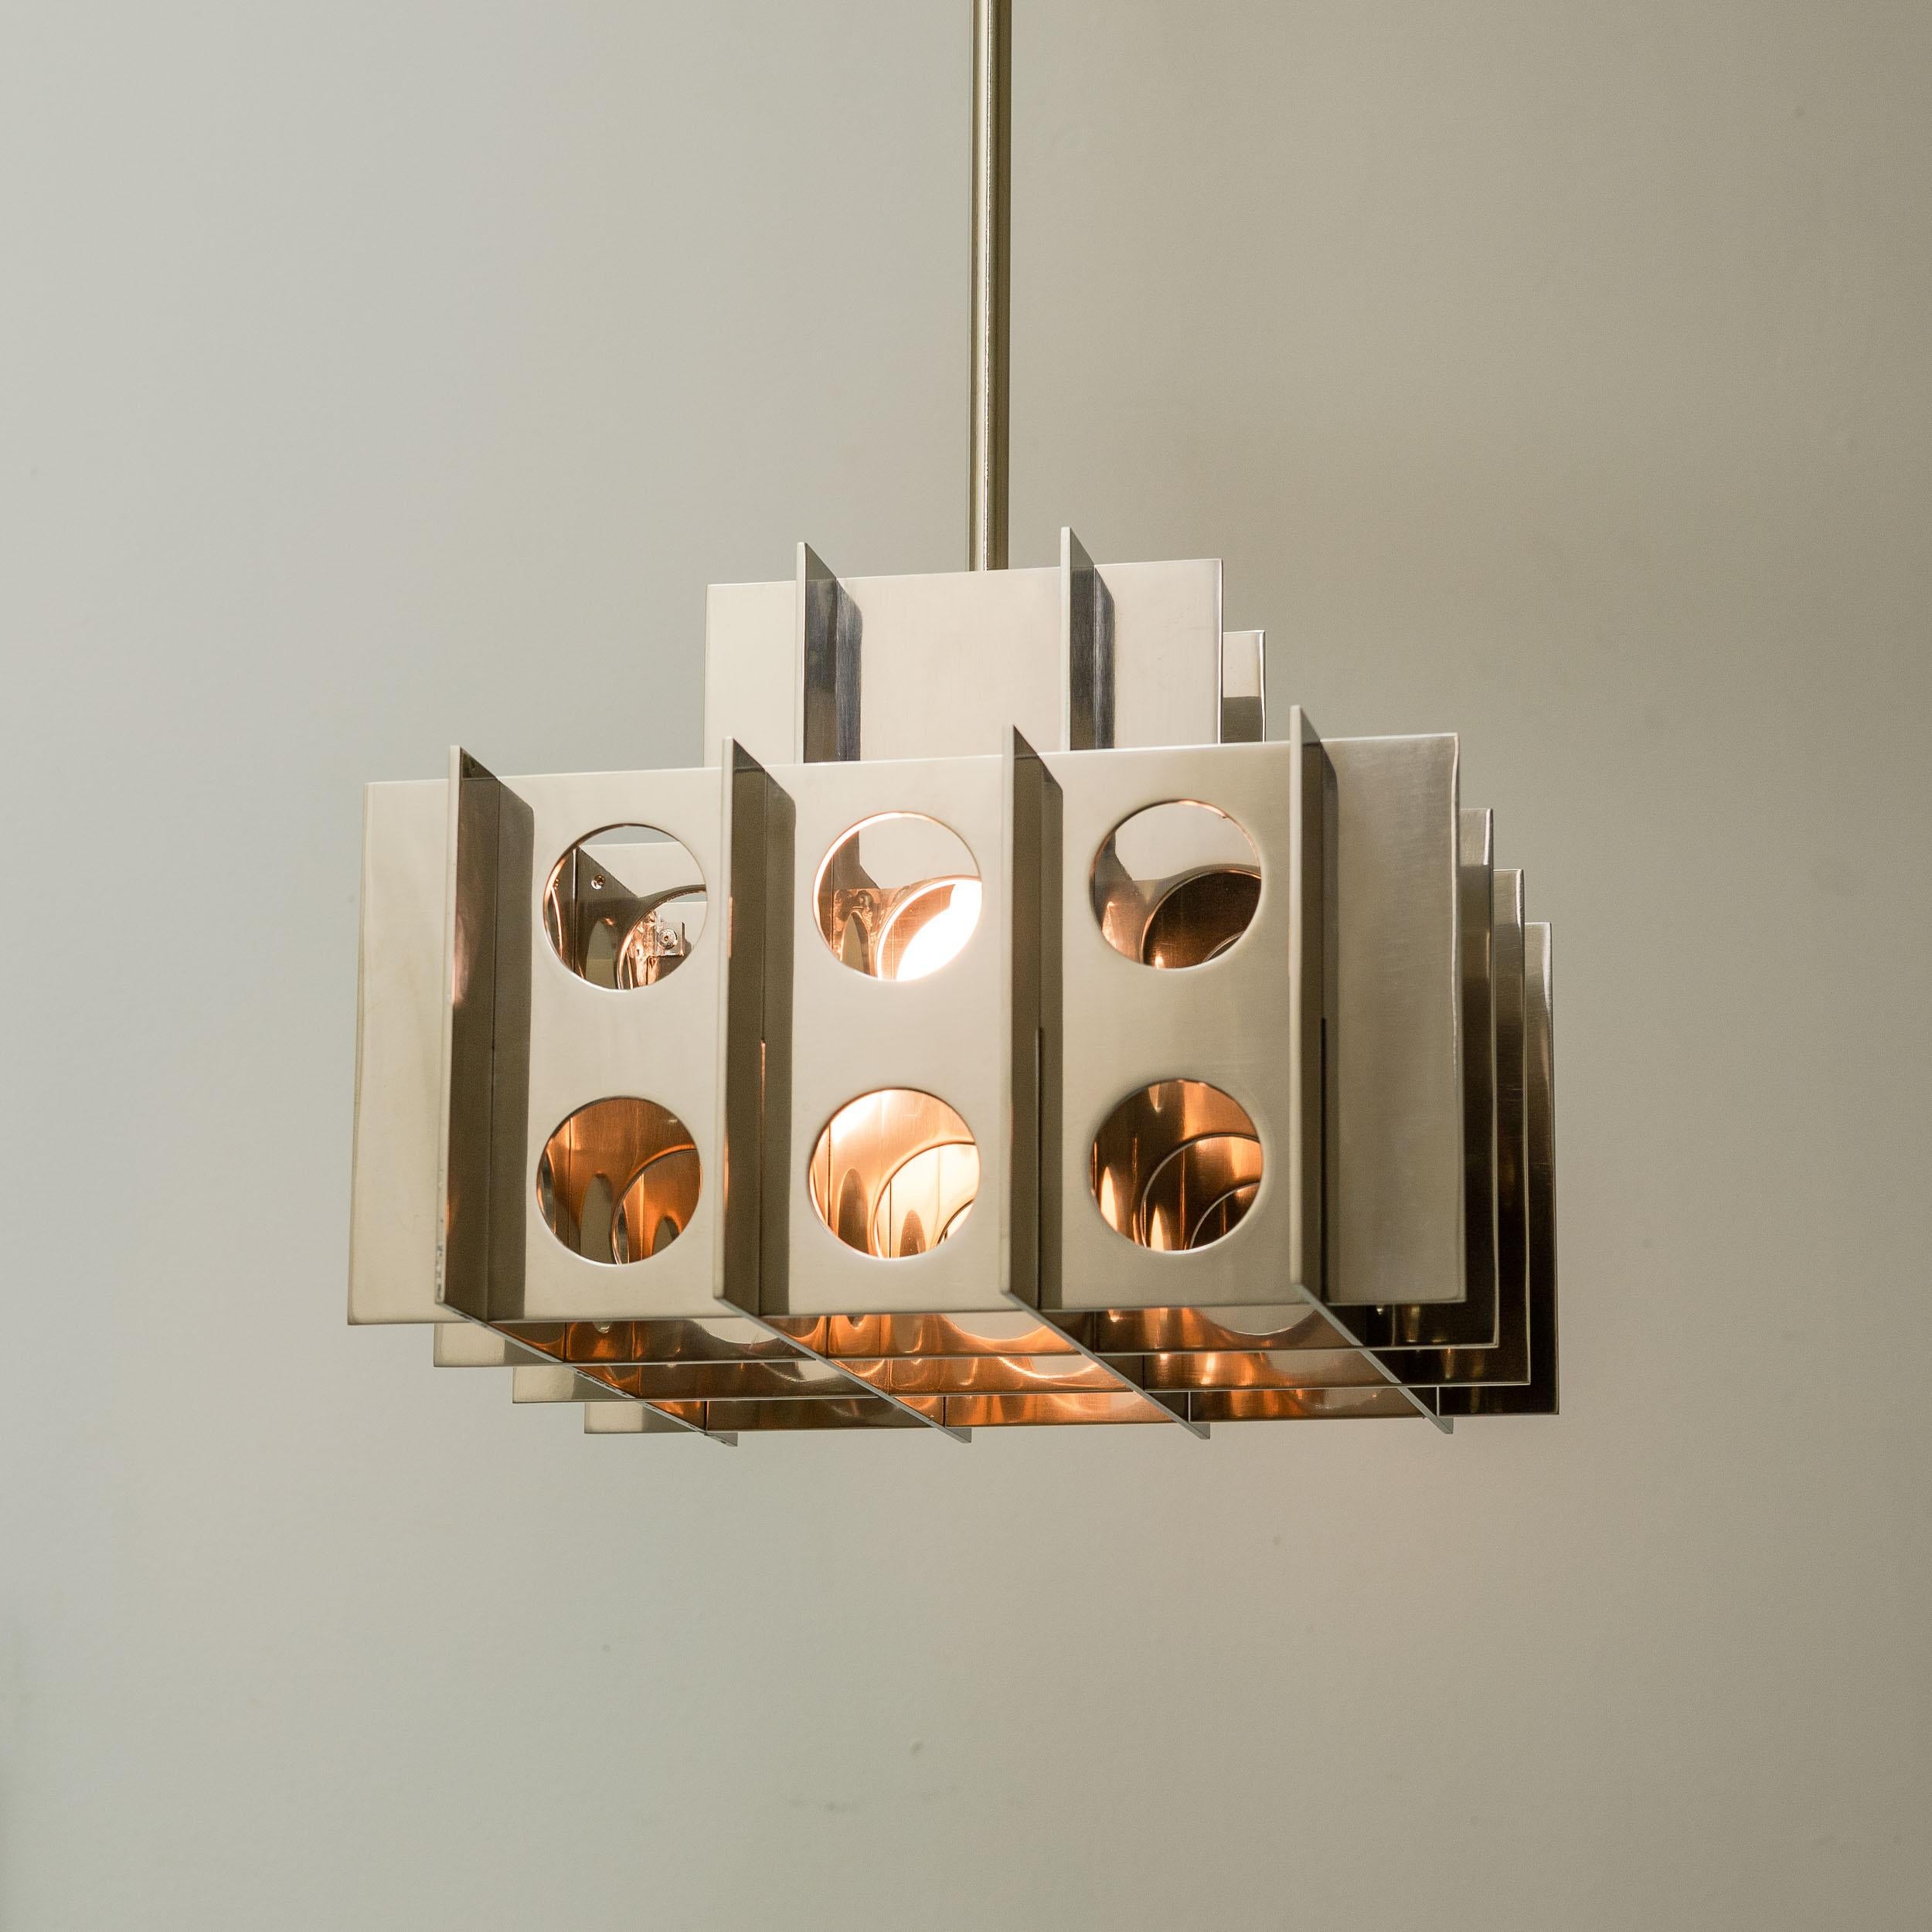 TENFOLD PENDANT 3TA 18inch, Polished Nickel by Luft Tanaka Studio

Composed of interlocking mirror polished sheetmetal panels, the Tenfold Series is inspired by brutalism and the architectural styles of the 1970s. 

Made to order. Assembled and